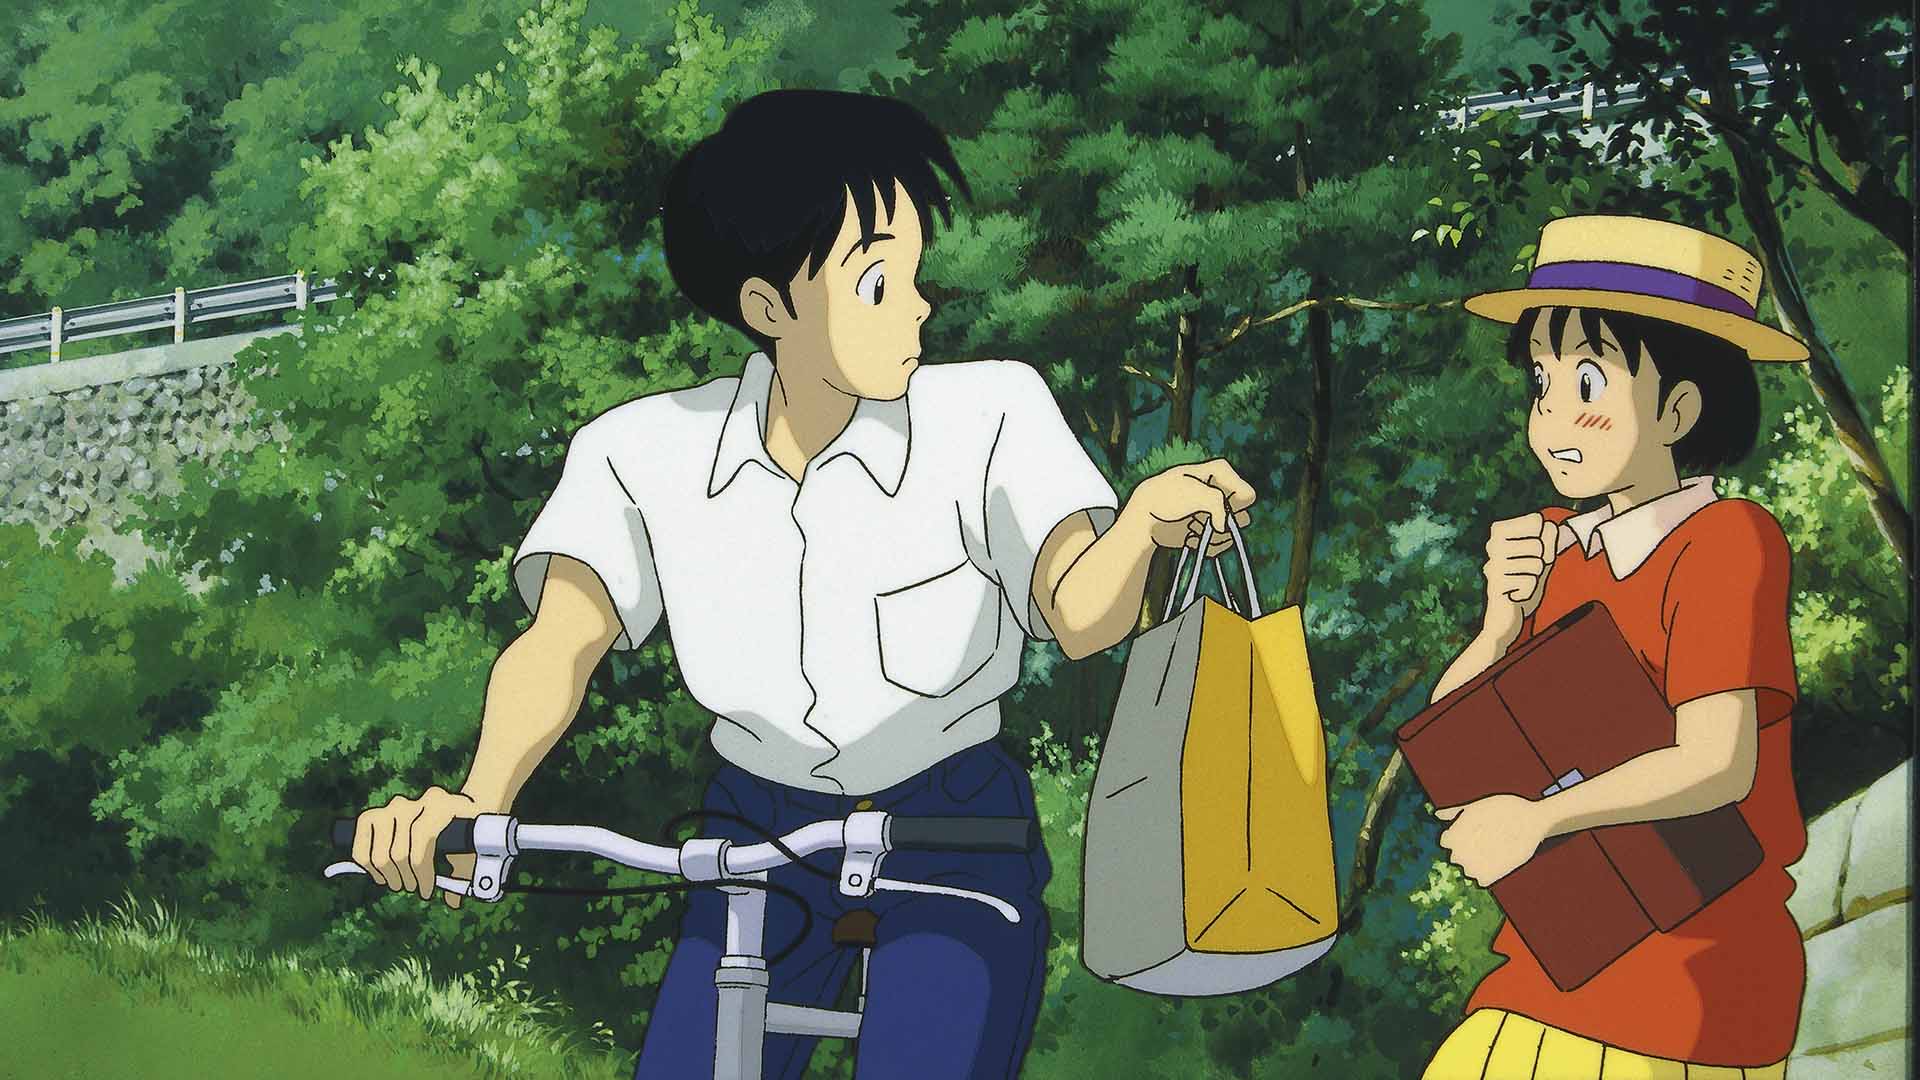 Studio Ghibli Movies Ranked From Worst to Best